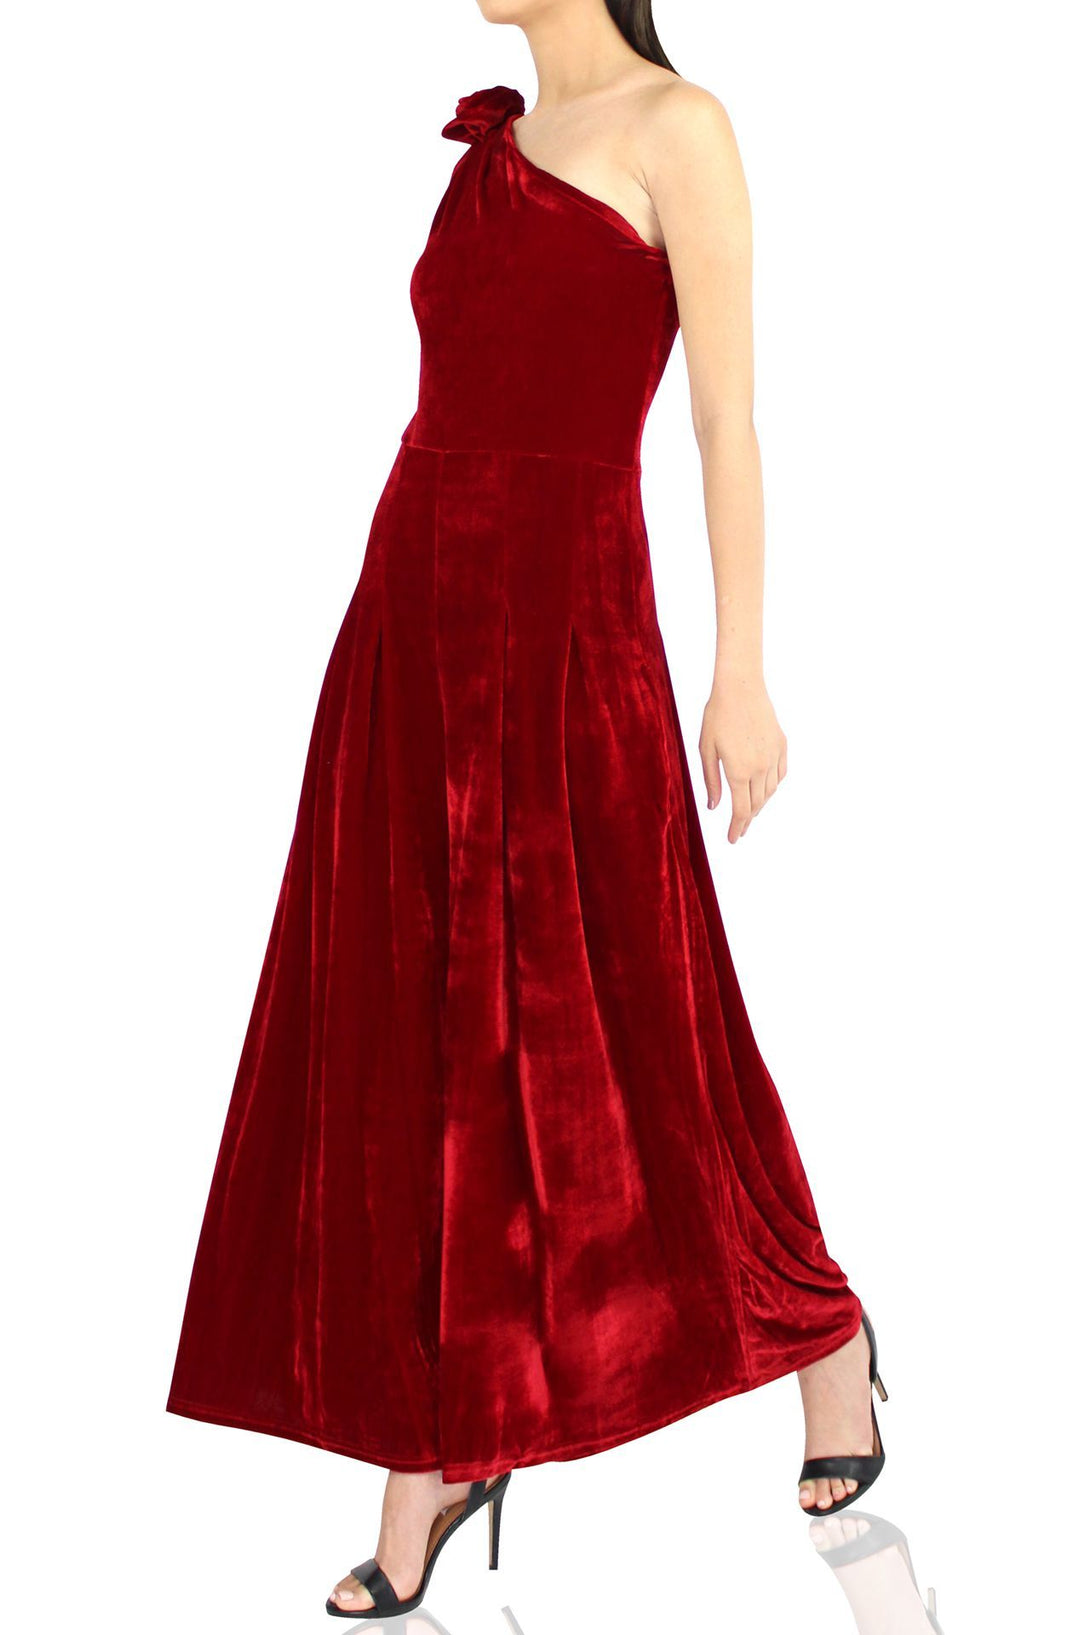 One-Shoulder-Long-Dress-In-Red-By-Kyle-Richard